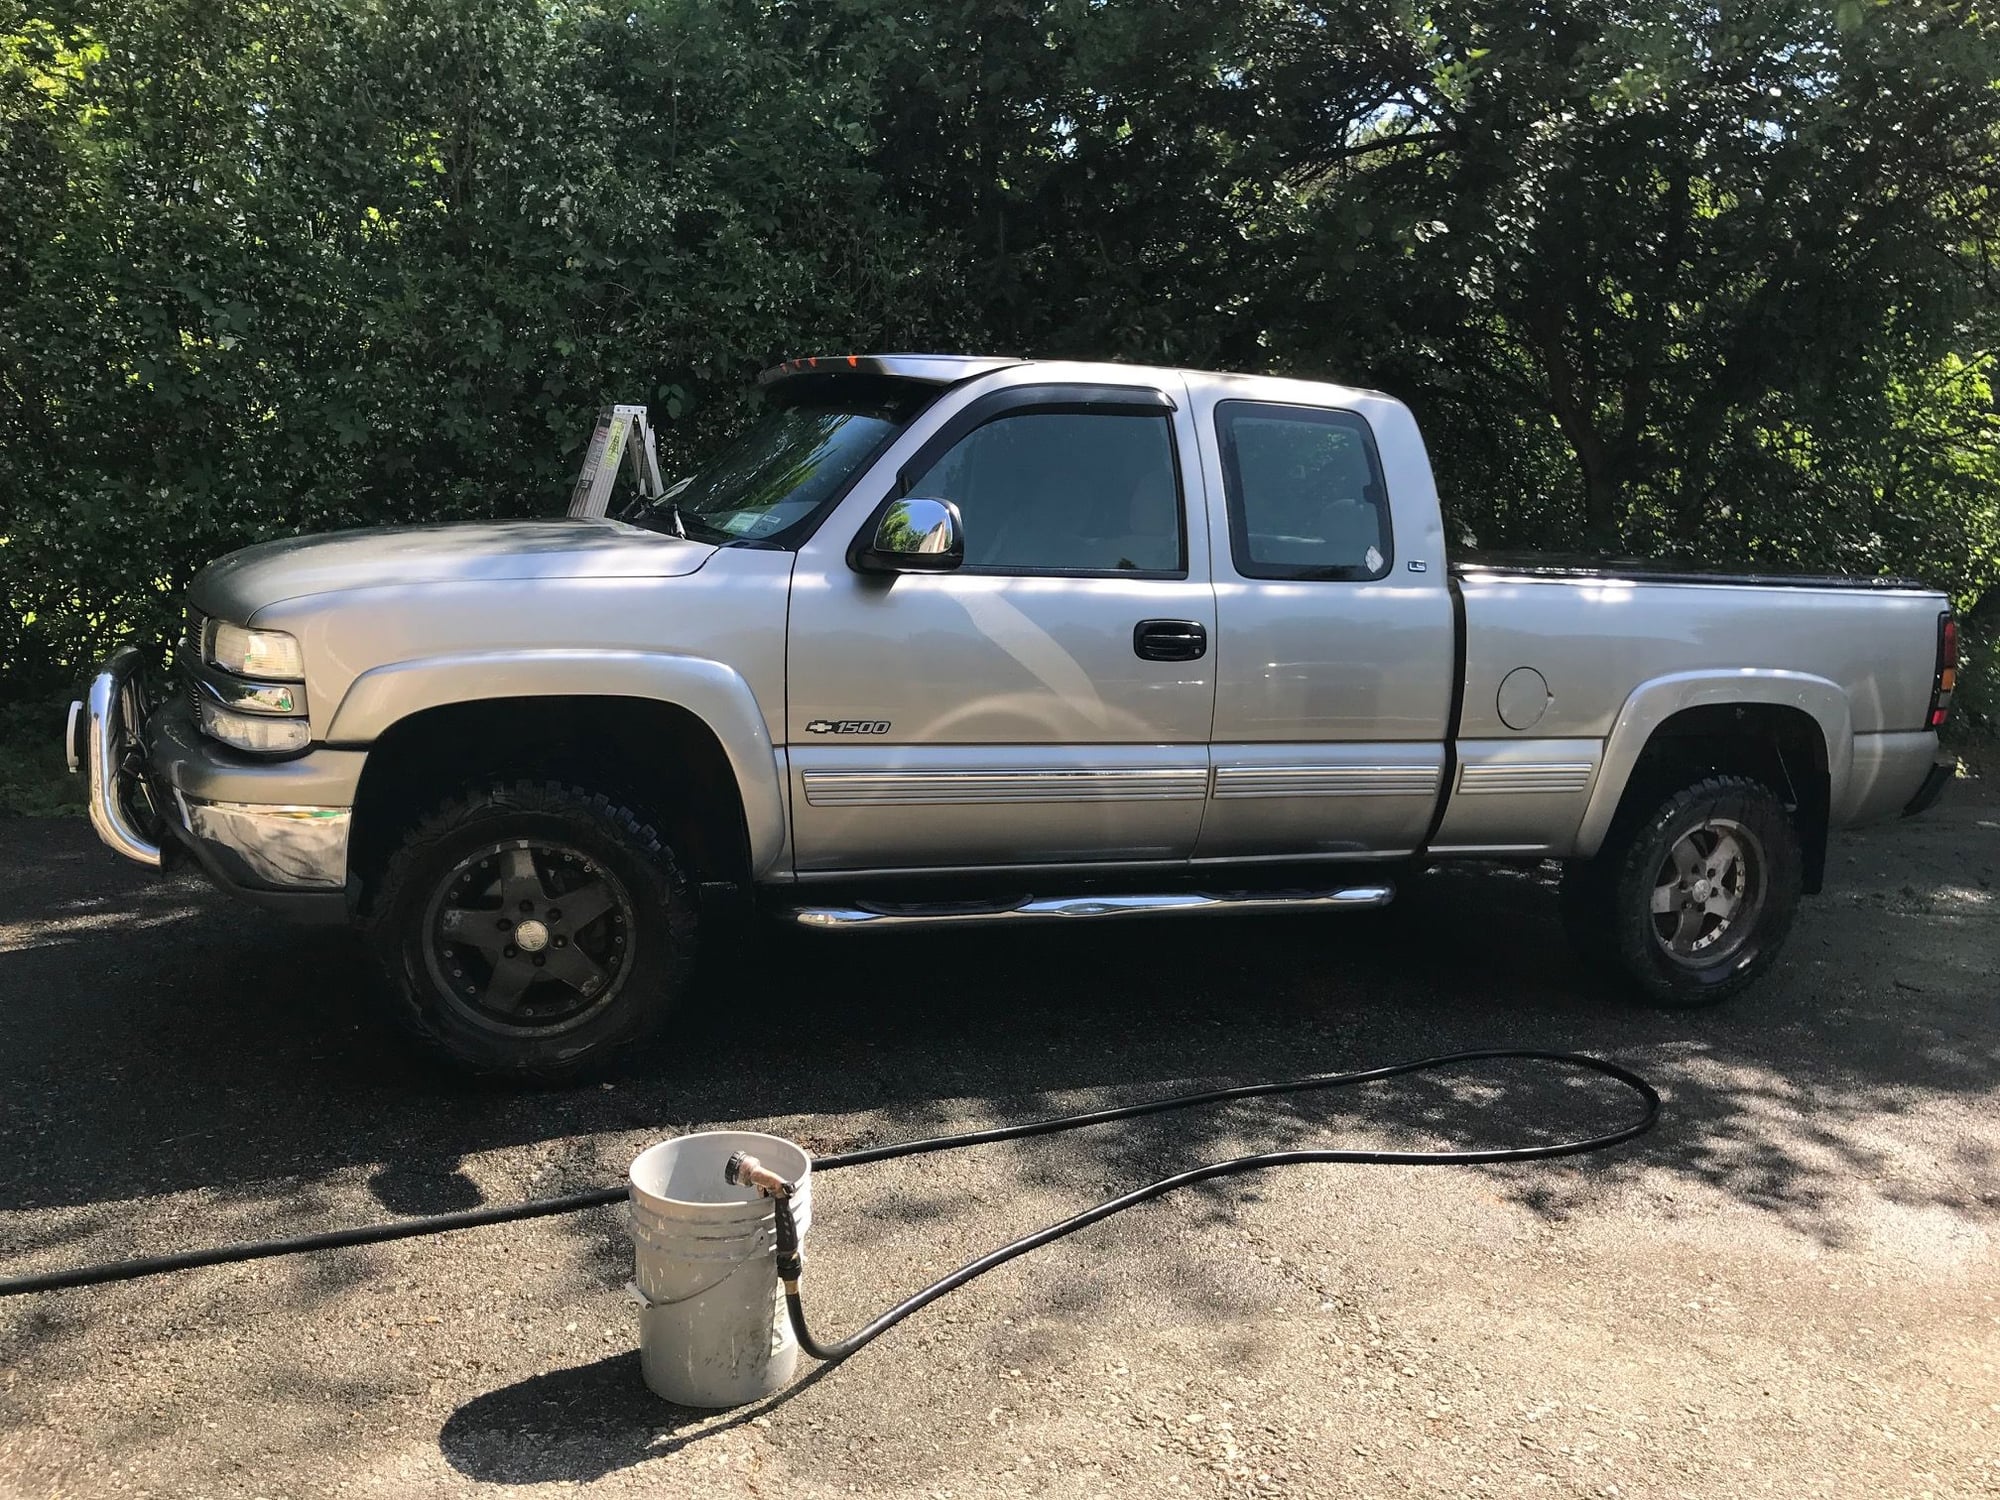 2000 Chevrolet Silverado 1500 - 2000 Silverado LS 4x4 Ext Cab Cammed 6.0 swap - Used - VIN 1GCEK19V2YE285447 - 155,000 Miles - 8 cyl - 4WD - Automatic - Truck - Gold - Wappingers Falls, NY 12590, United States